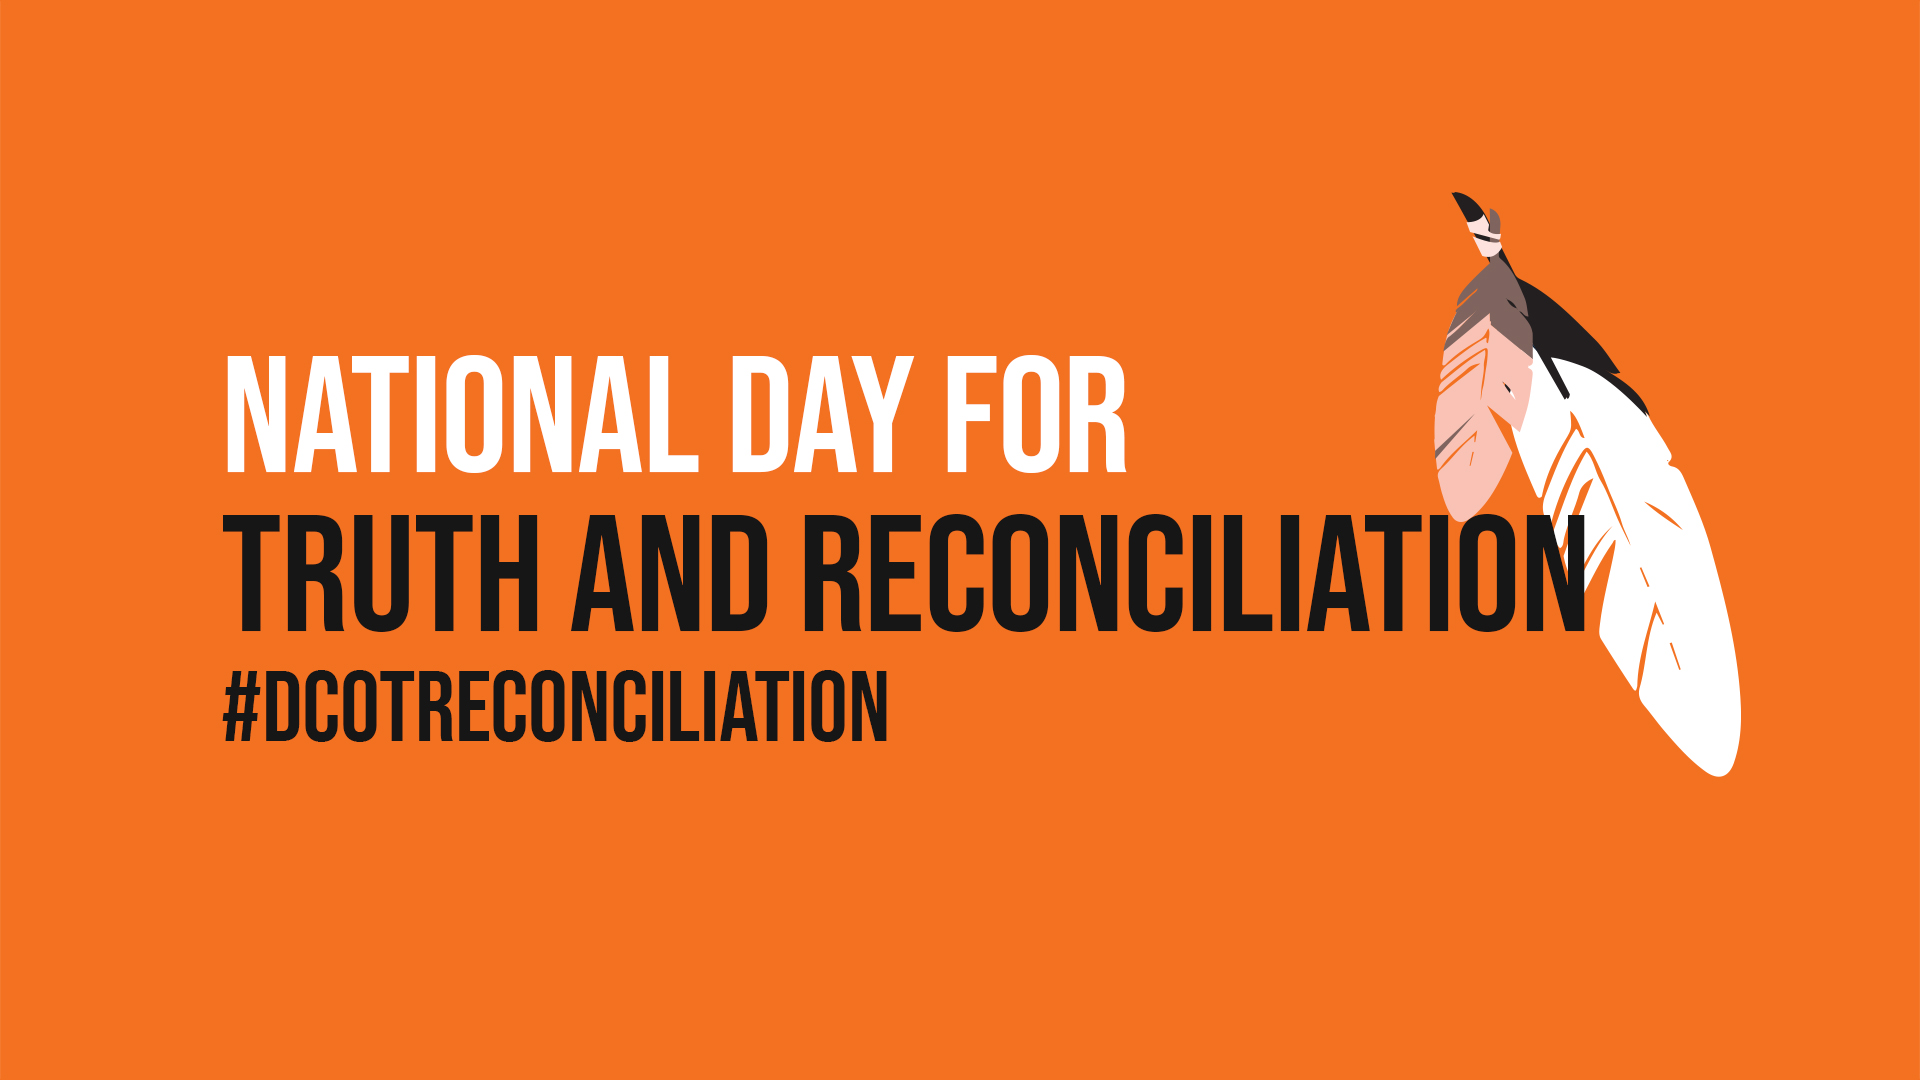 Orange Shirt Day and the National Day for Truth and Reconciliation